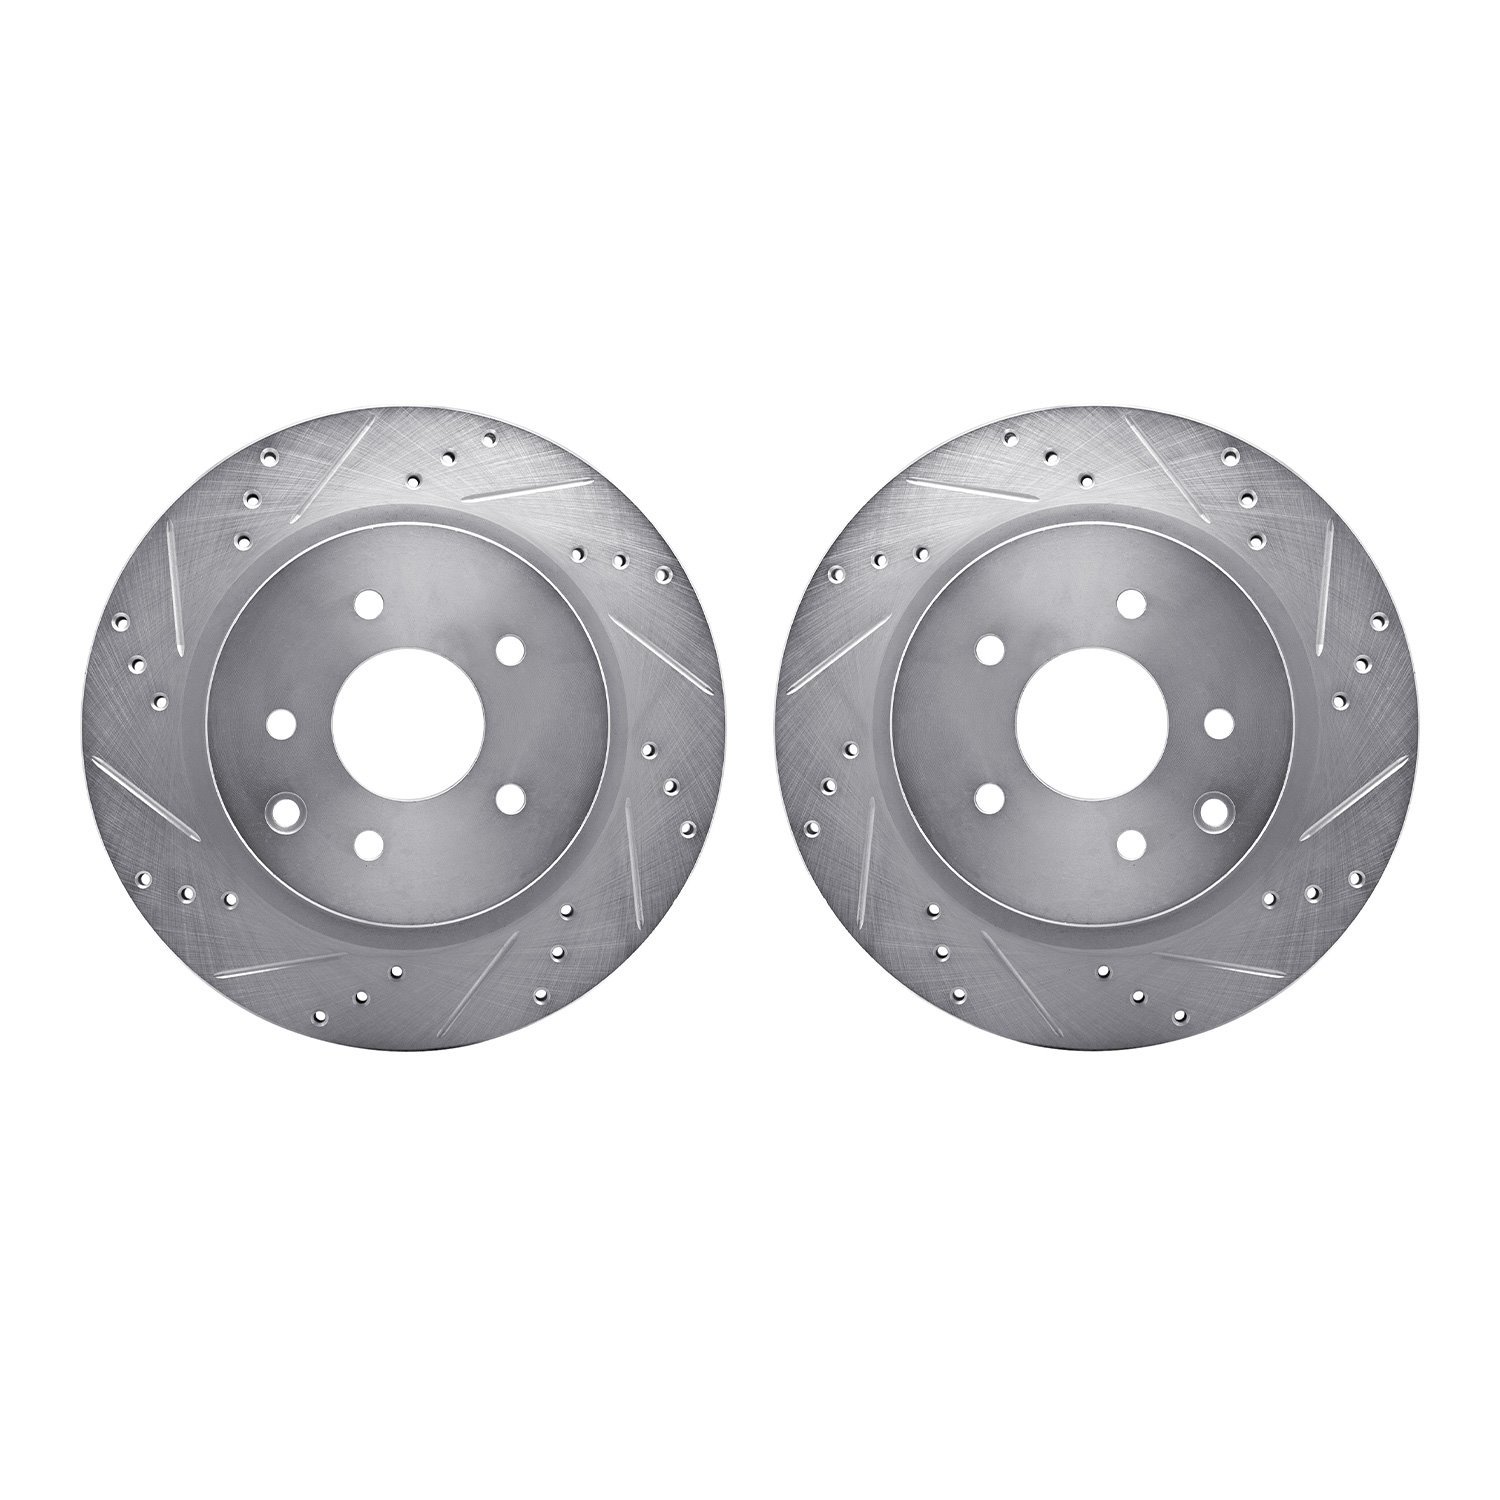 7002-67078 Drilled/Slotted Brake Rotors [Silver], Fits Select Infiniti/Nissan, Position: Rear